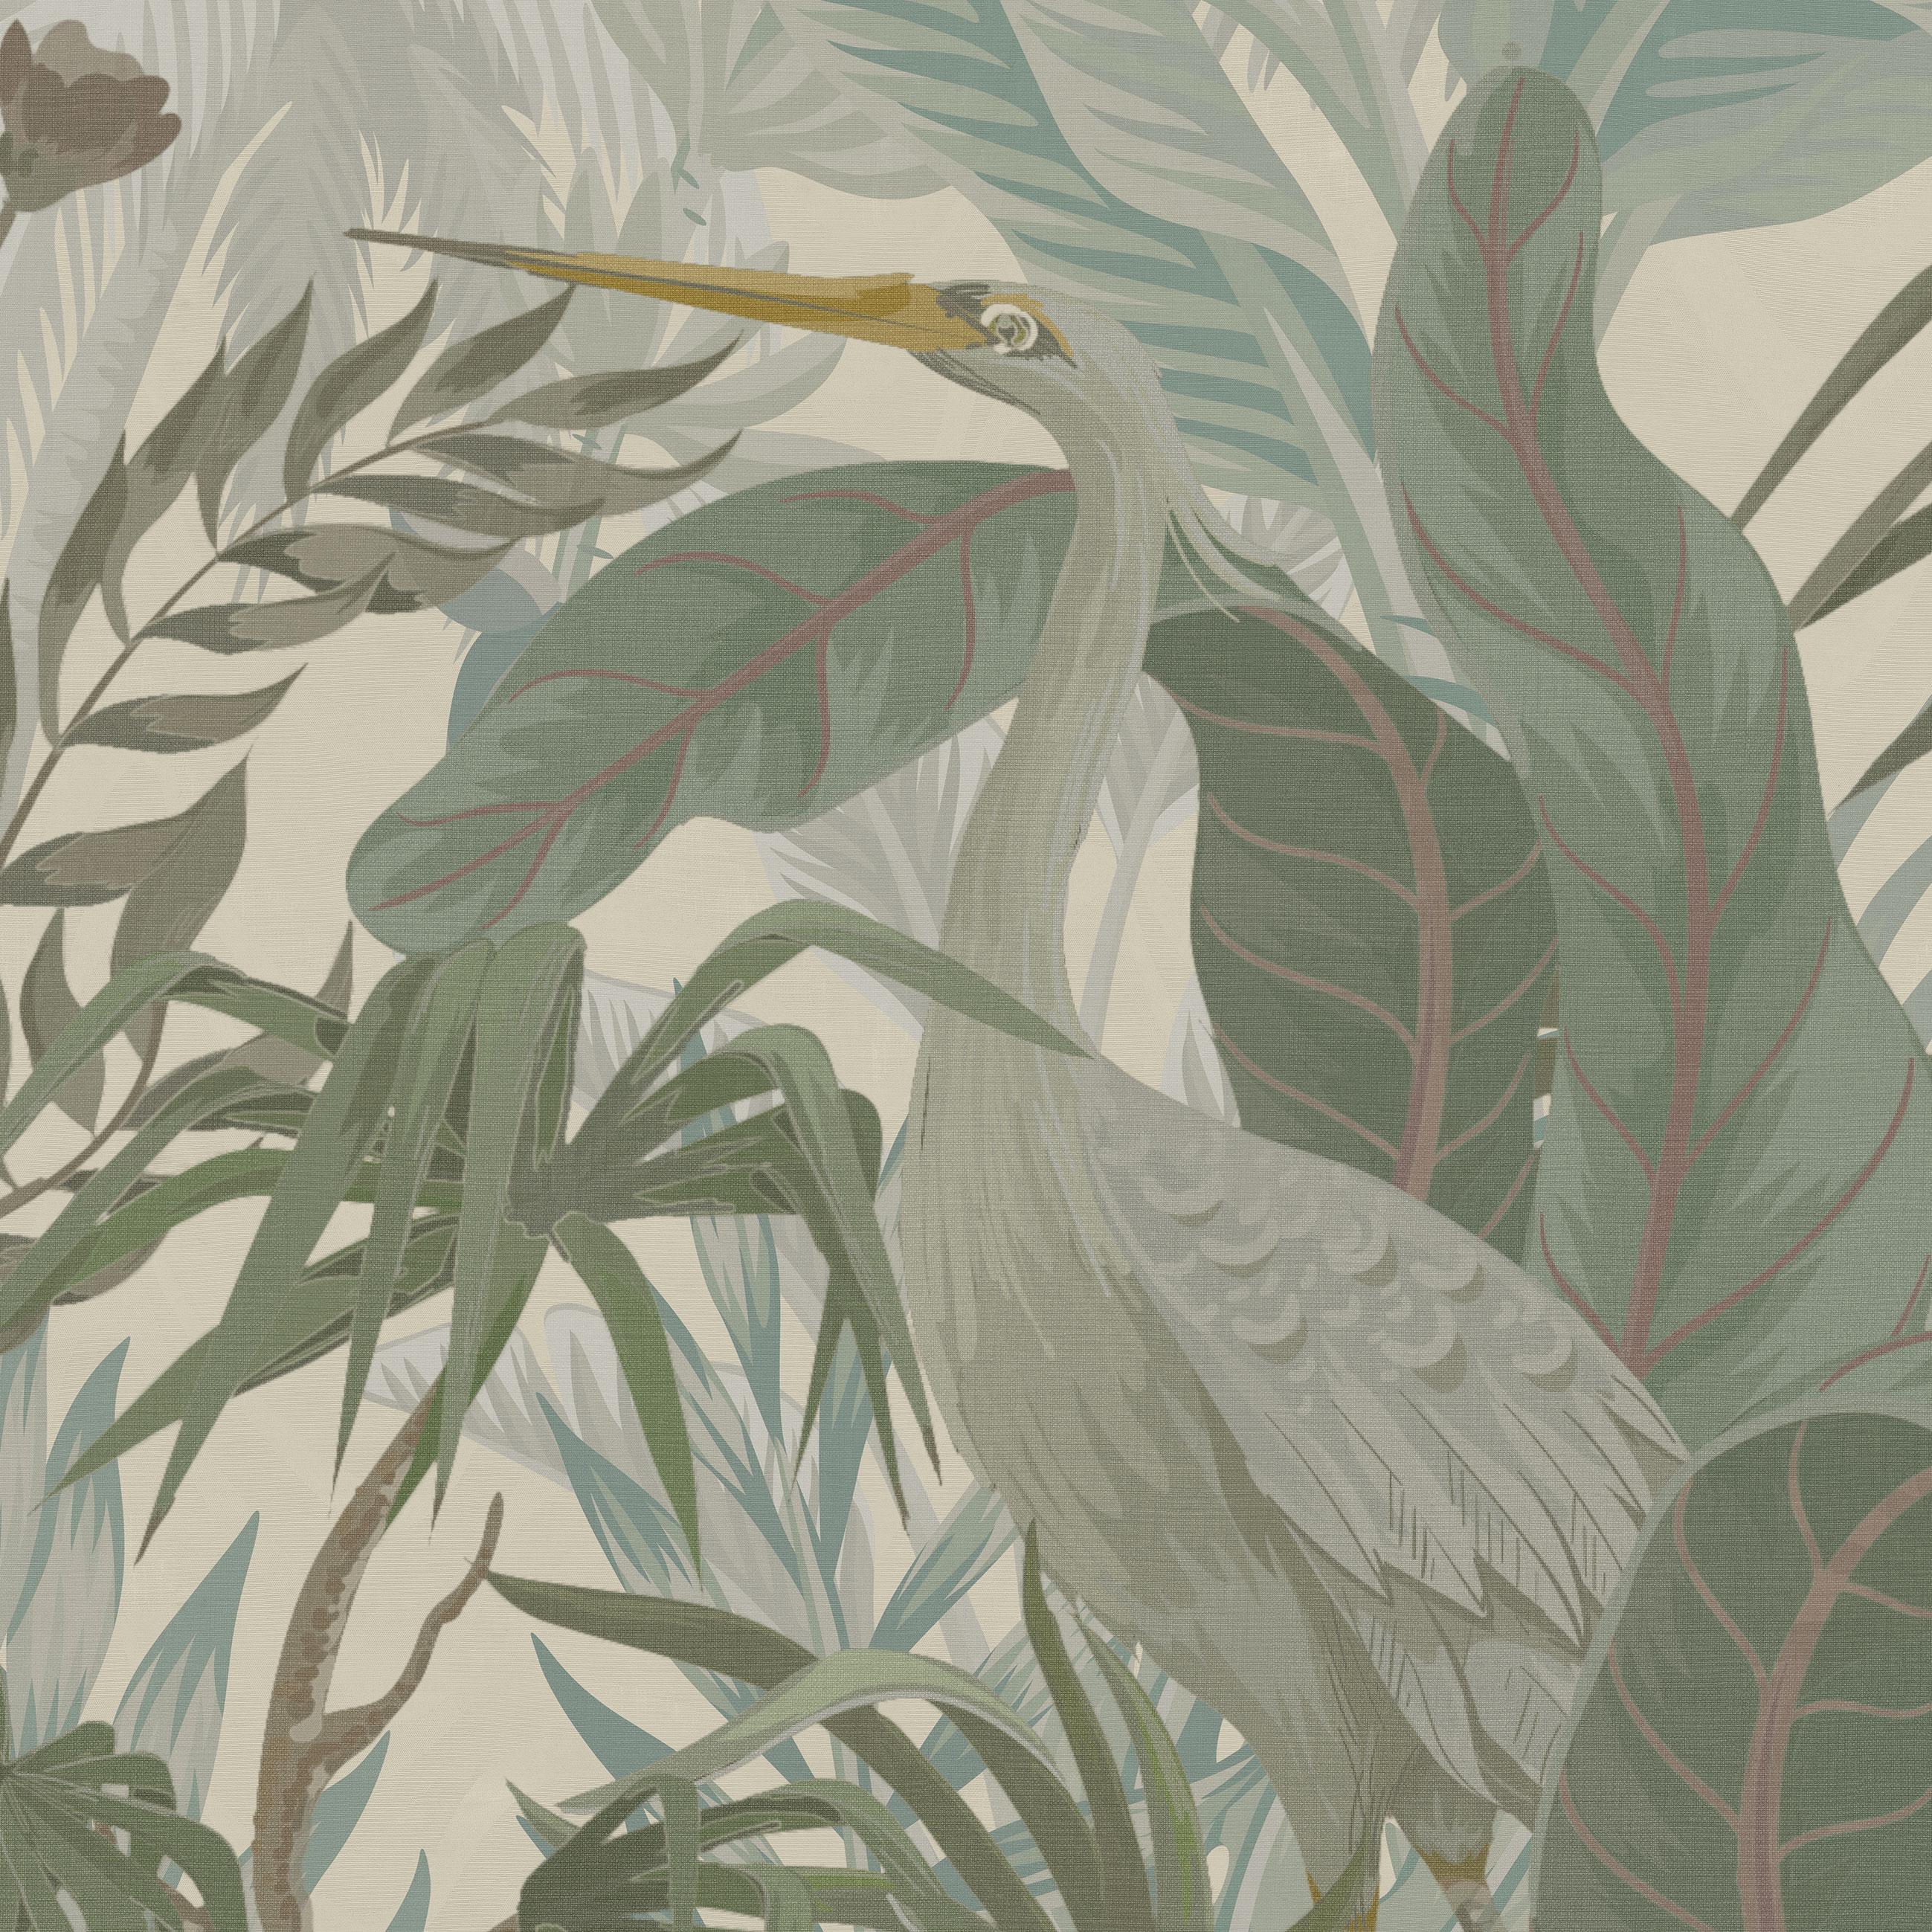 Modern Ornami Nature Birds Tropical Vinyl Wallpaper Made in Italy Digital Printing For Sale